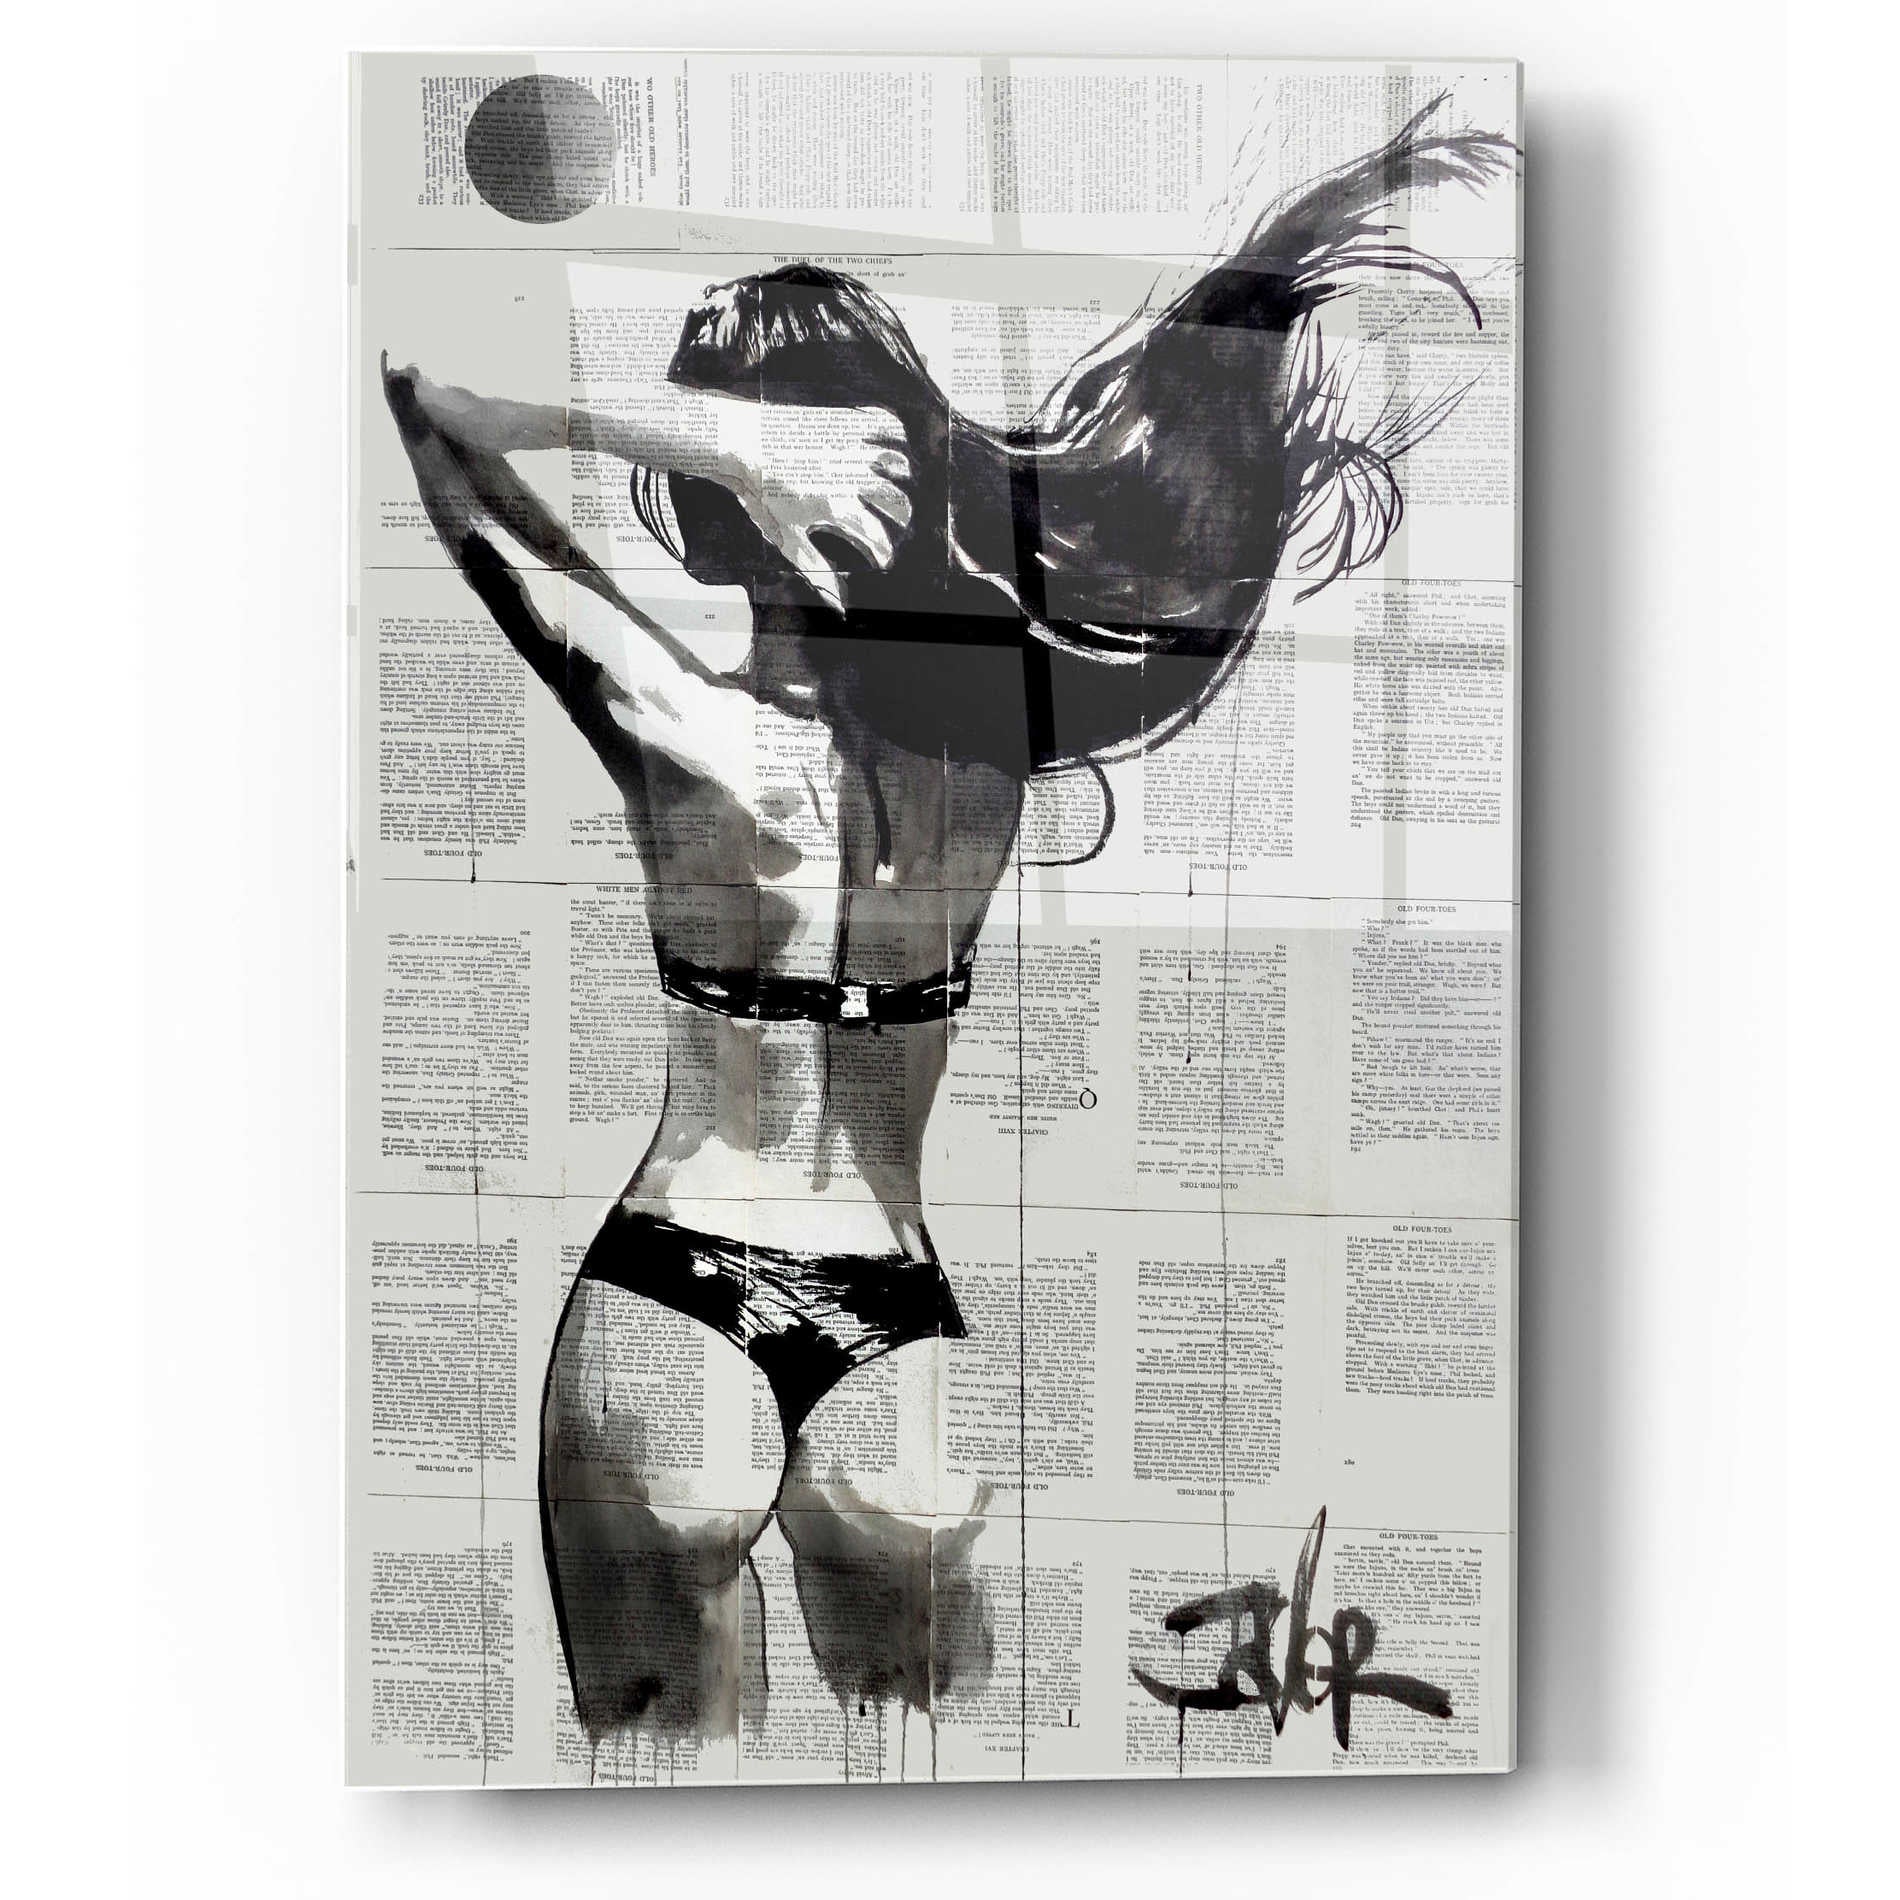 Epic Art 'In The Summertime' by Loui Jover Acrylic Glass Wall Art,12x16